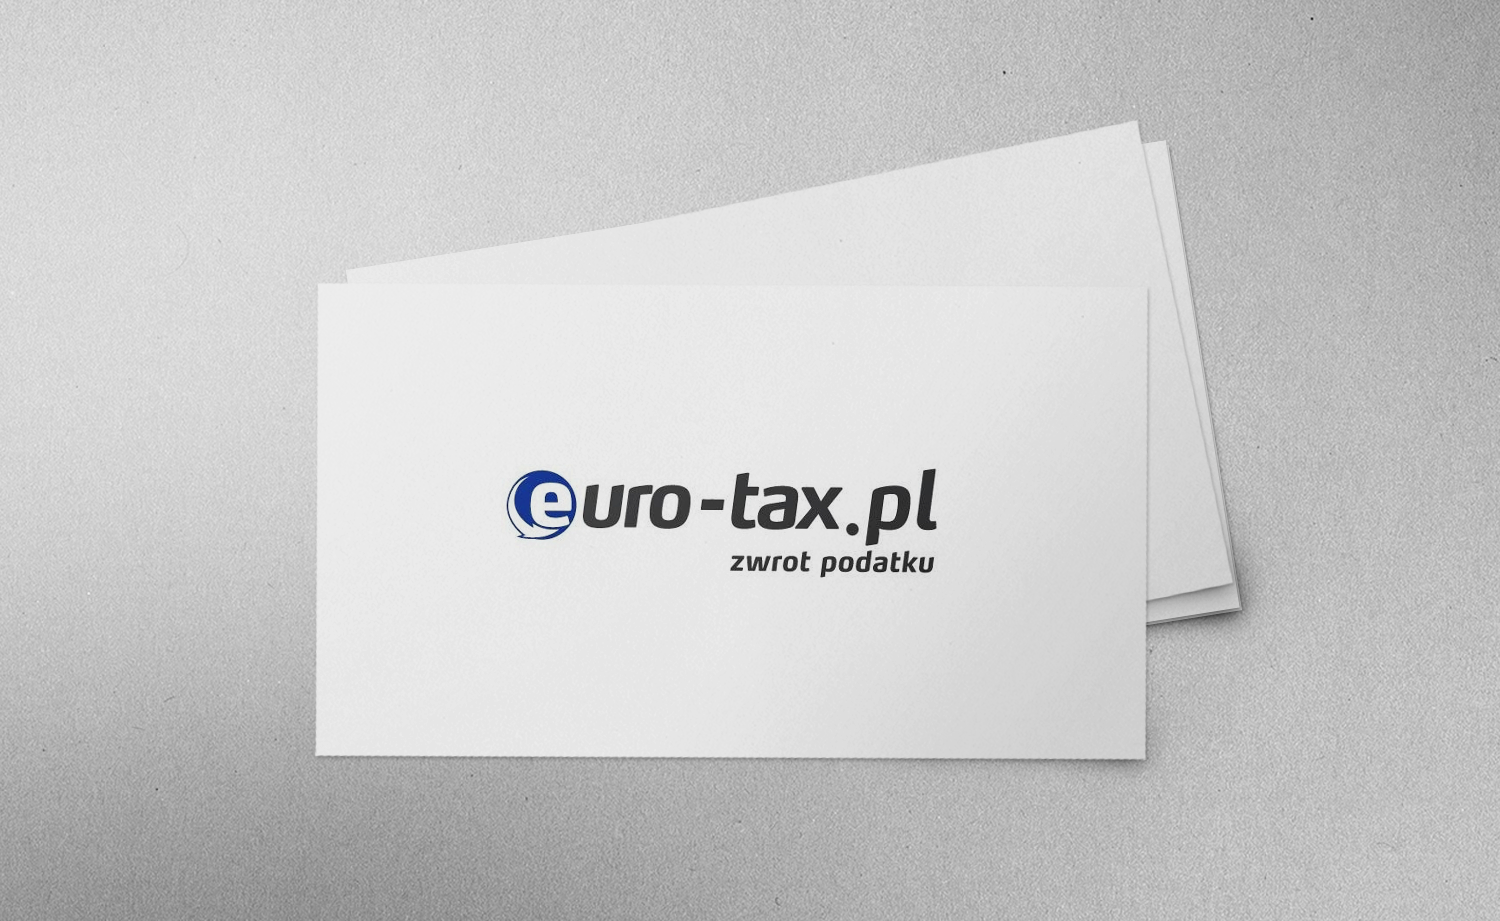 Euro-Tax extends the cooperation with BPR